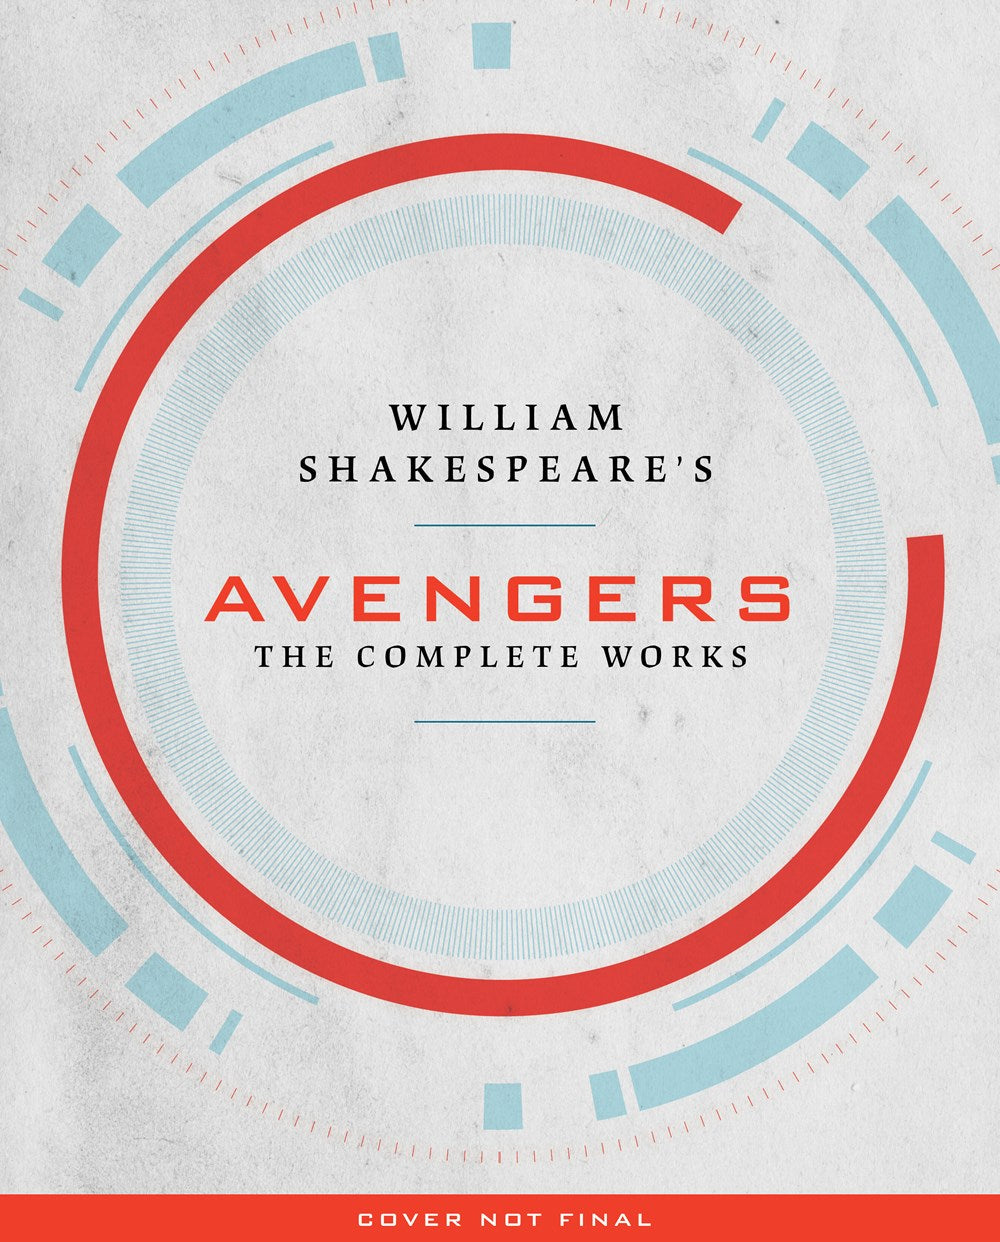 William Shakespeare's Avengers the Complete Works